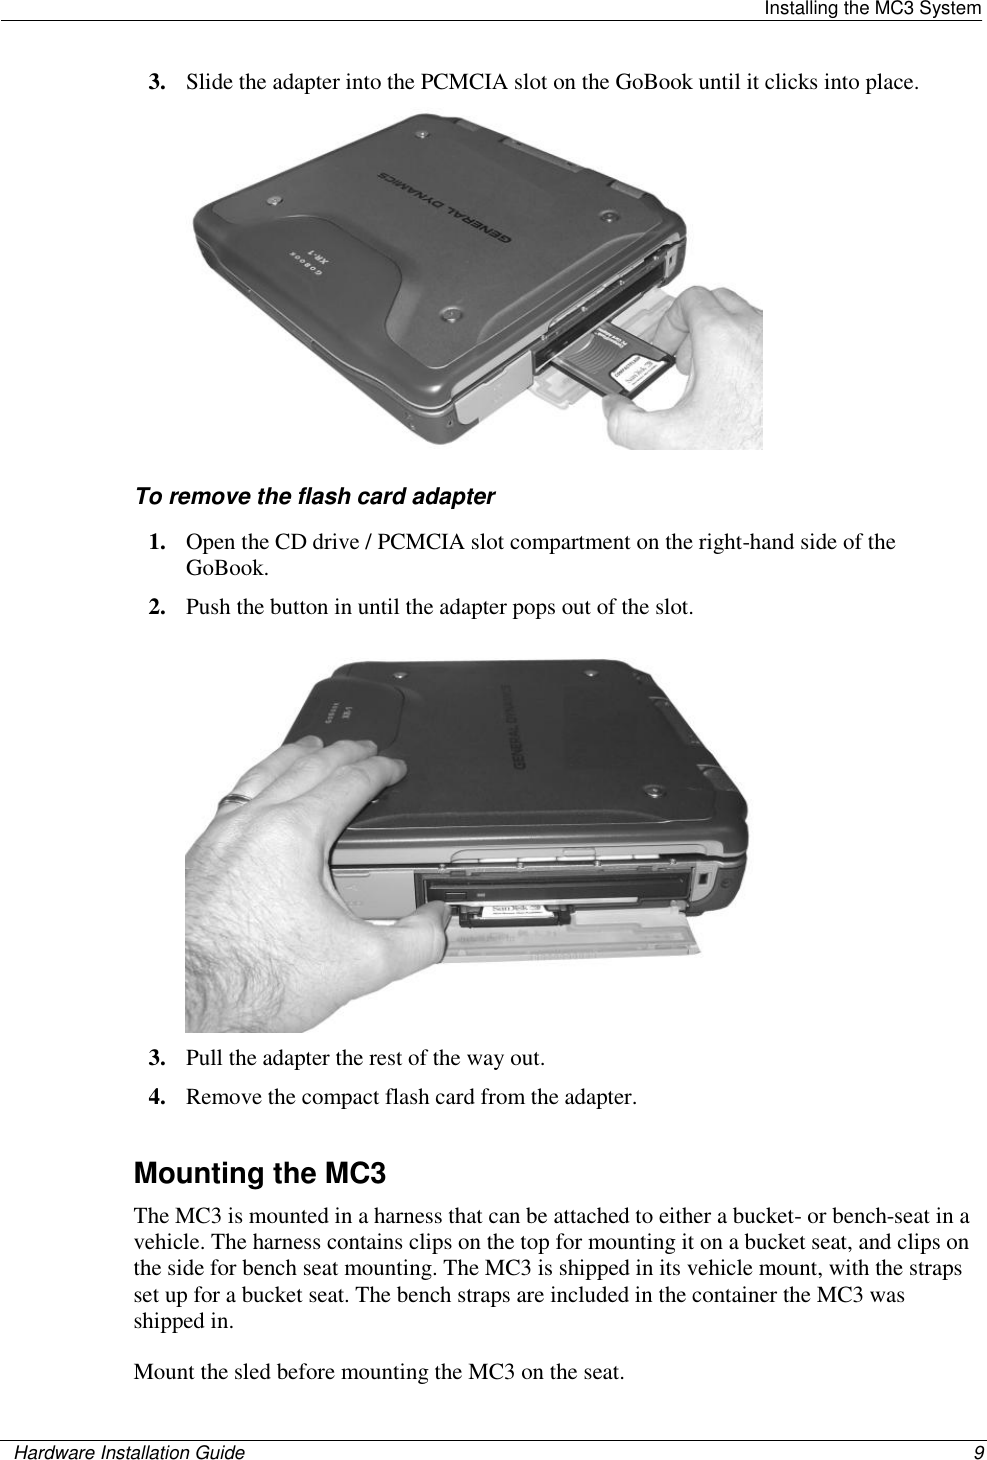   Installing the MC3 System    Hardware Installation Guide  9  3. Slide the adapter into the PCMCIA slot on the GoBook until it clicks into place.   To remove the flash card adapter 1. Open the CD drive / PCMCIA slot compartment on the right-hand side of the GoBook.  2. Push the button in until the adapter pops out of the slot.  3. Pull the adapter the rest of the way out. 4. Remove the compact flash card from the adapter.   Mounting the MC3 The MC3 is mounted in a harness that can be attached to either a bucket- or bench-seat in a vehicle. The harness contains clips on the top for mounting it on a bucket seat, and clips on the side for bench seat mounting. The MC3 is shipped in its vehicle mount, with the straps set up for a bucket seat. The bench straps are included in the container the MC3 was shipped in. Mount the sled before mounting the MC3 on the seat.  